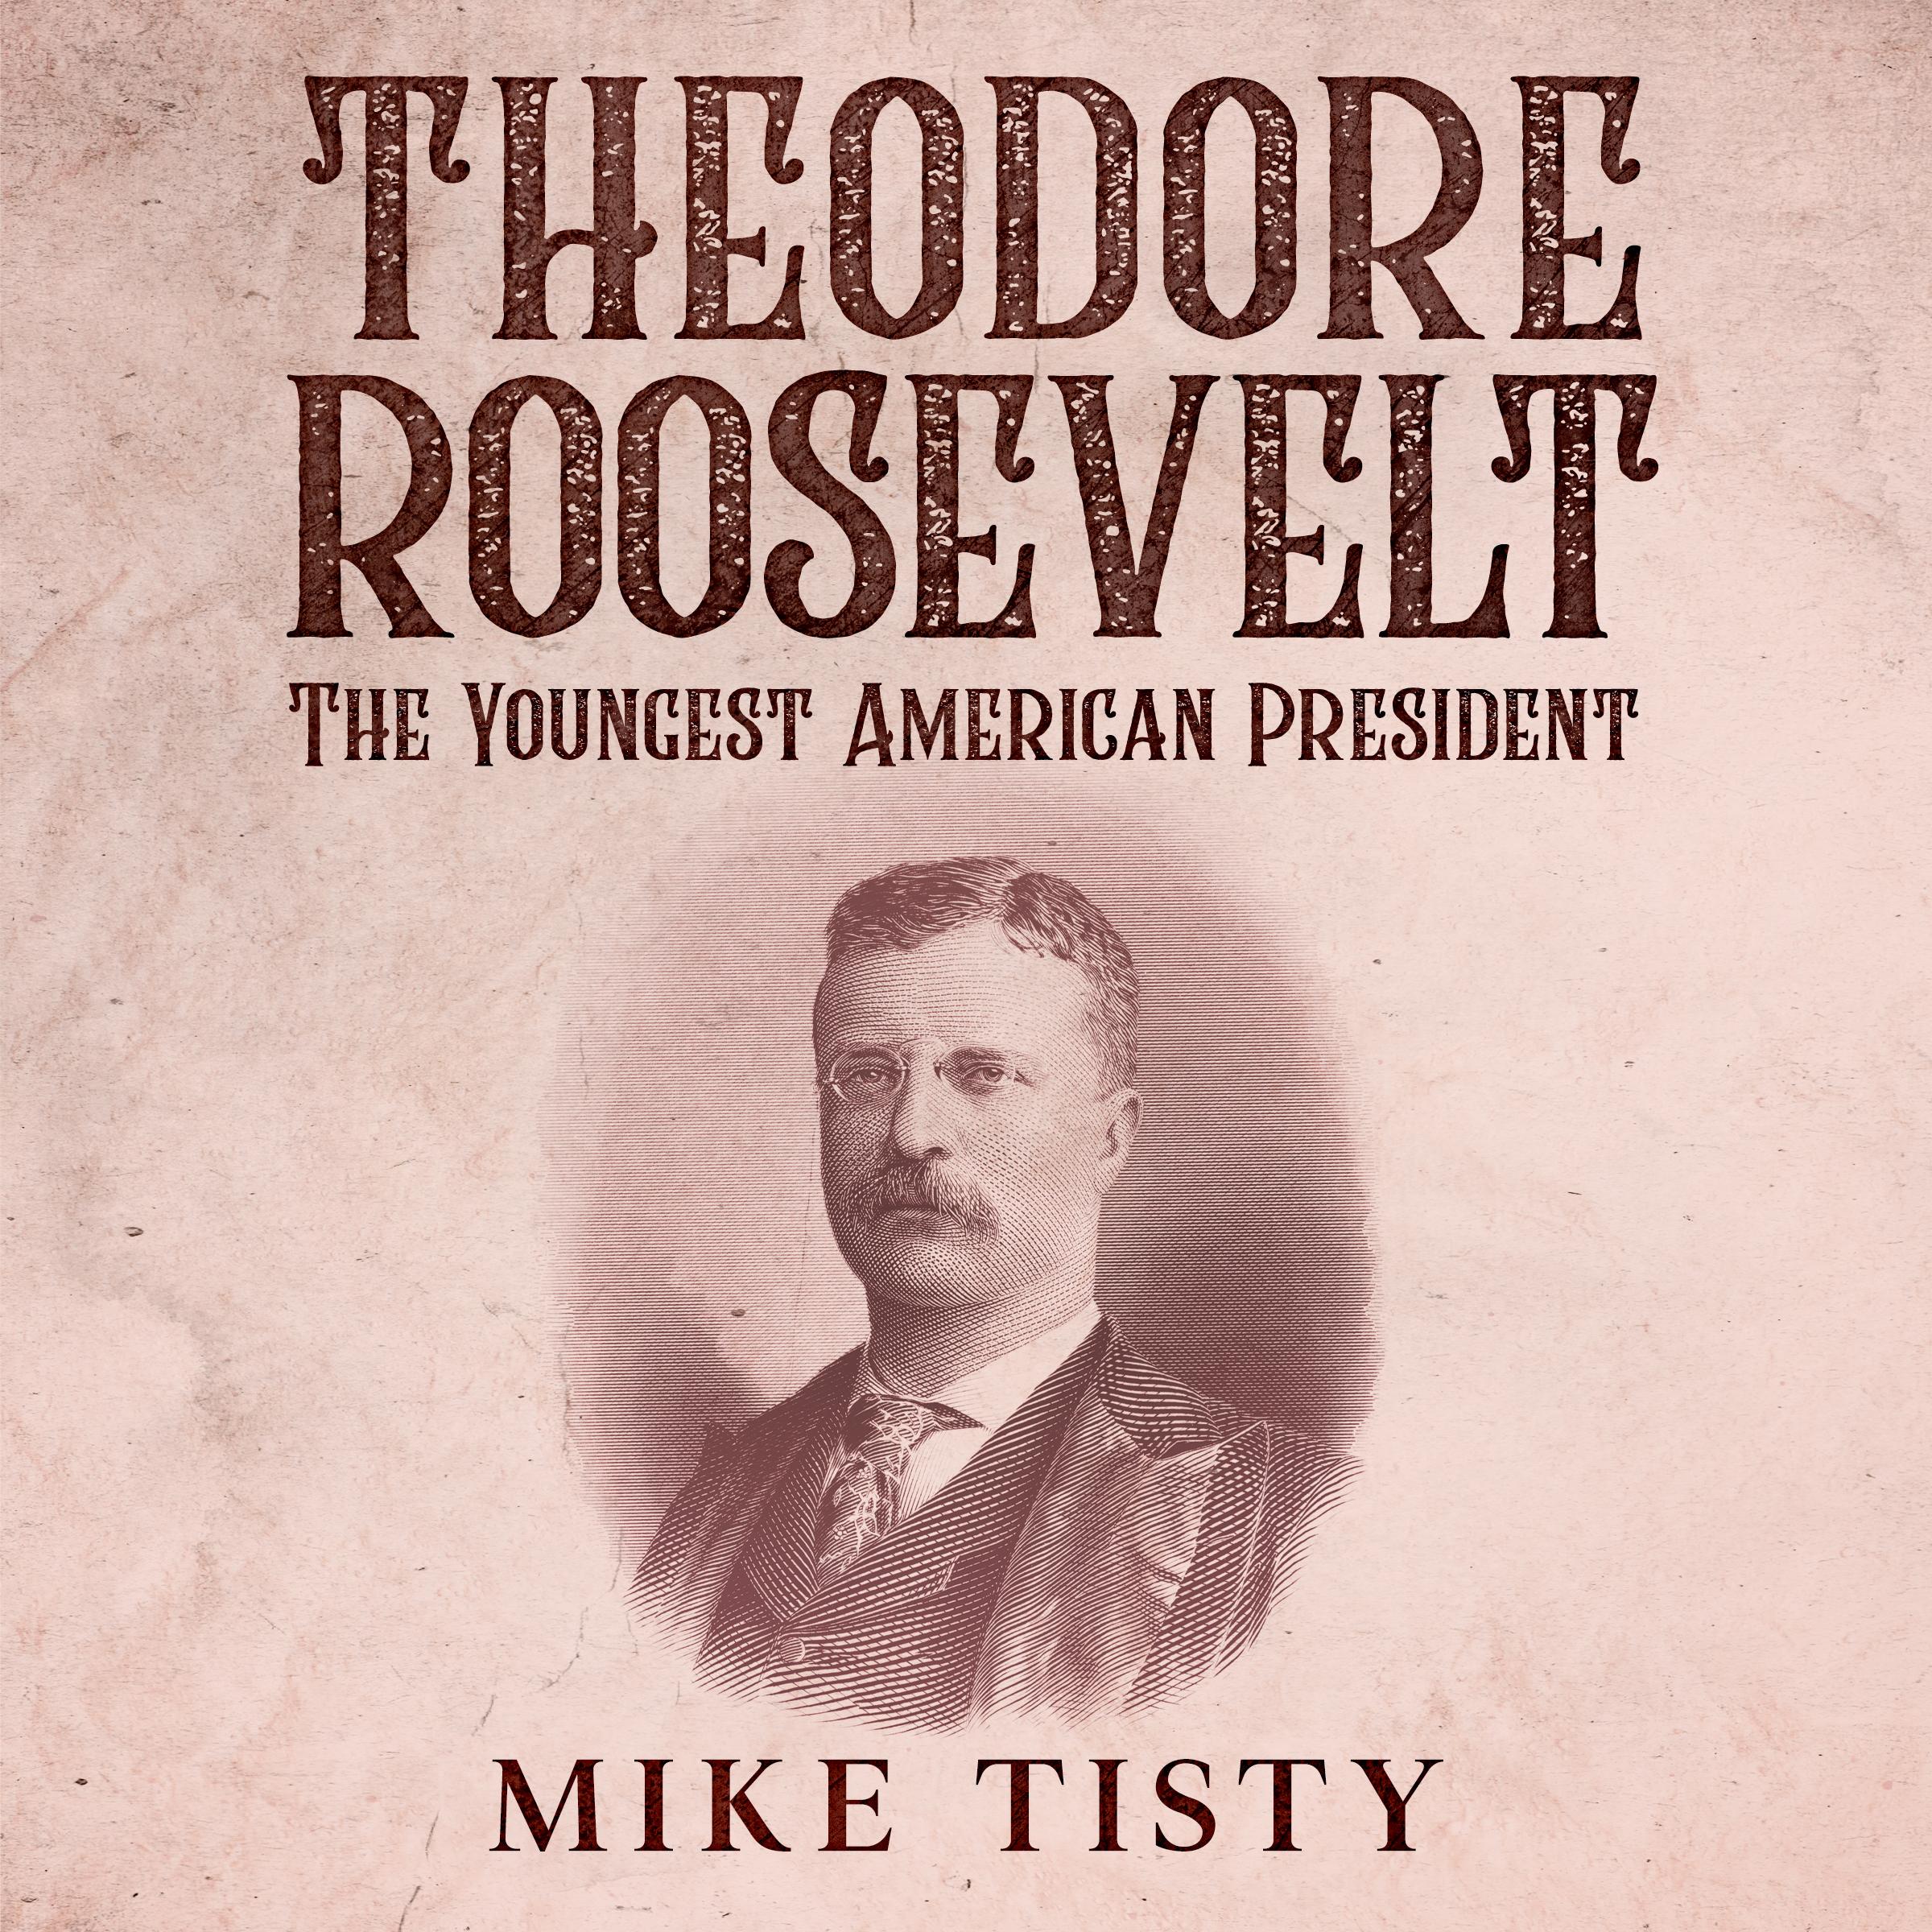 Theodore Roosevelt - The Youngest American President